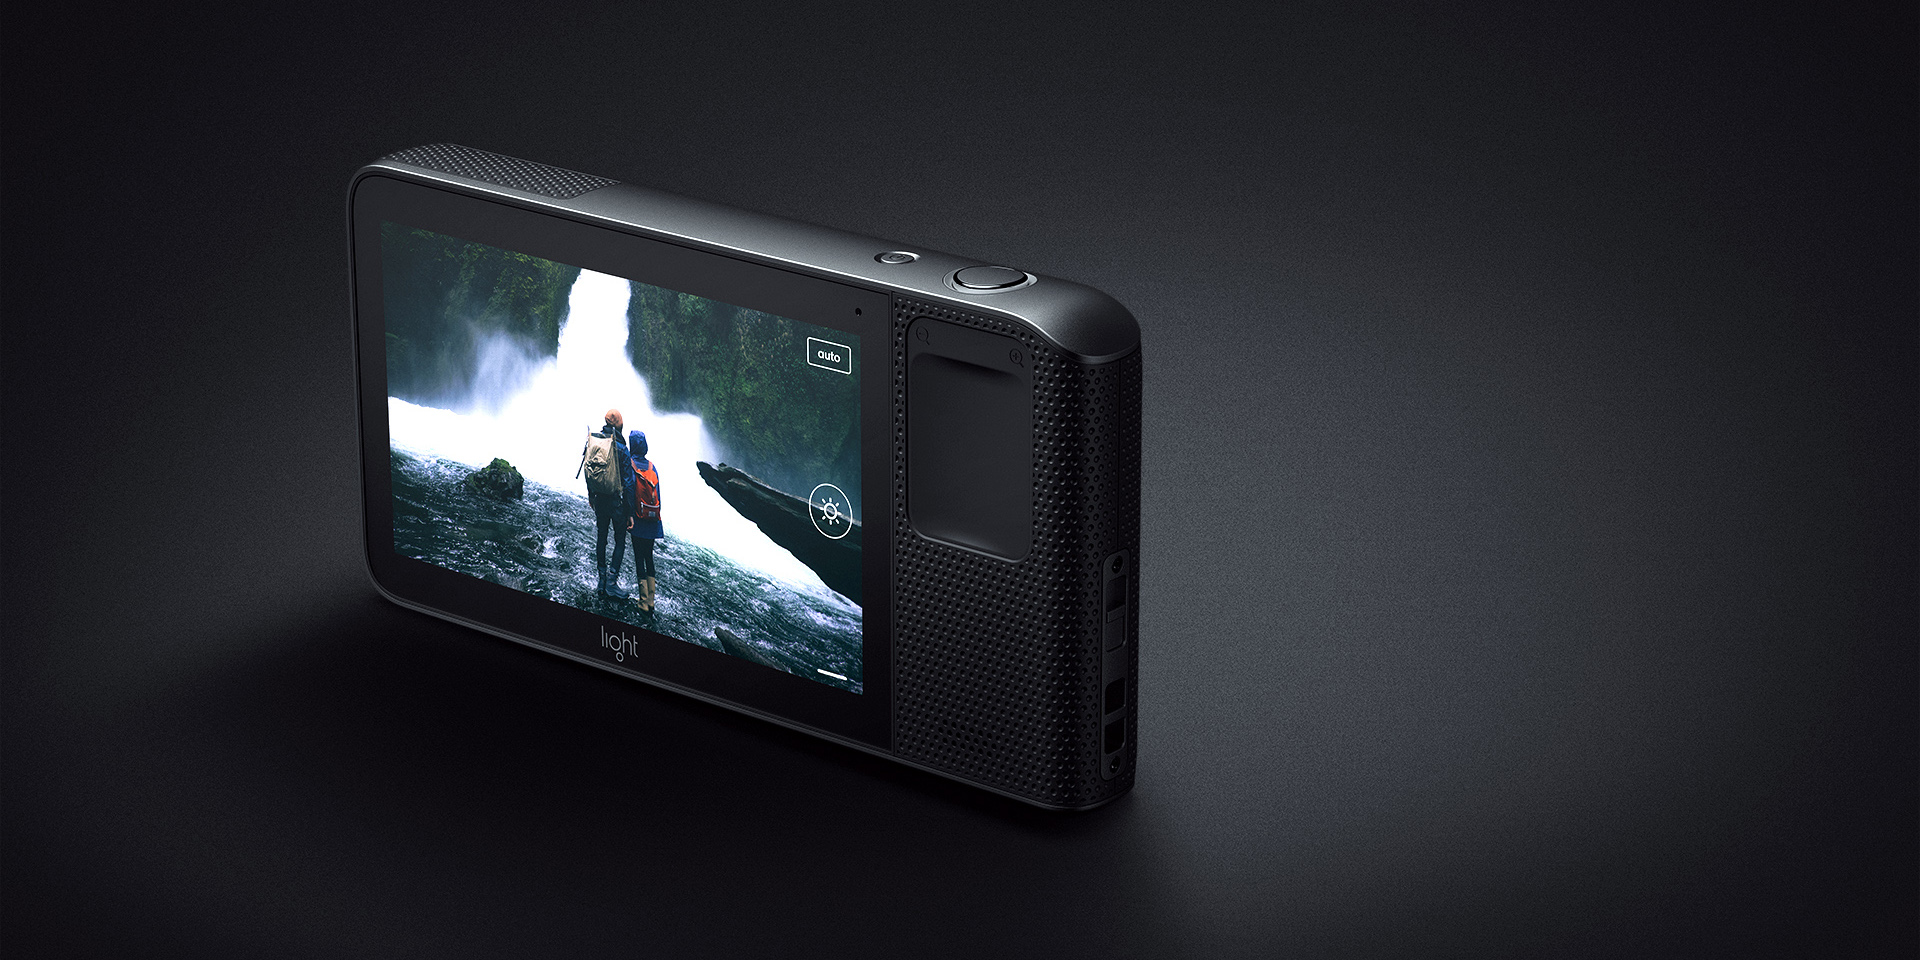 This Bug-Eyed Camera Is A Whole New Take On Capturing Pro Quality Pics 